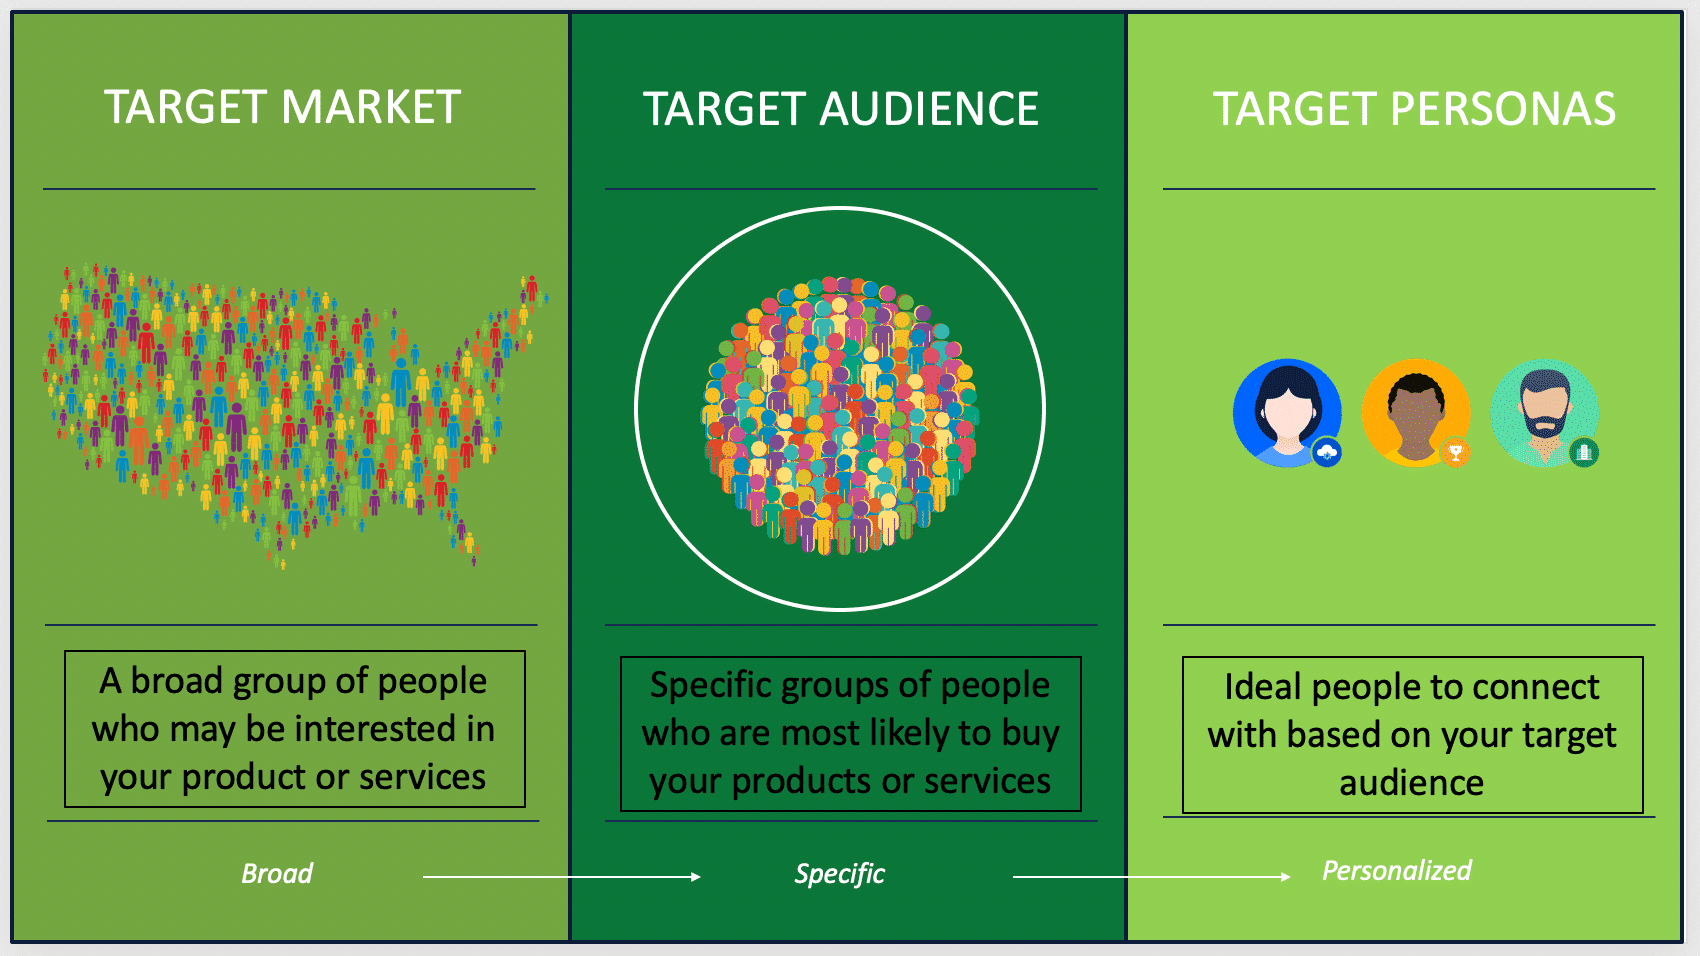 Focus on your target audience and personas to create remarkable content